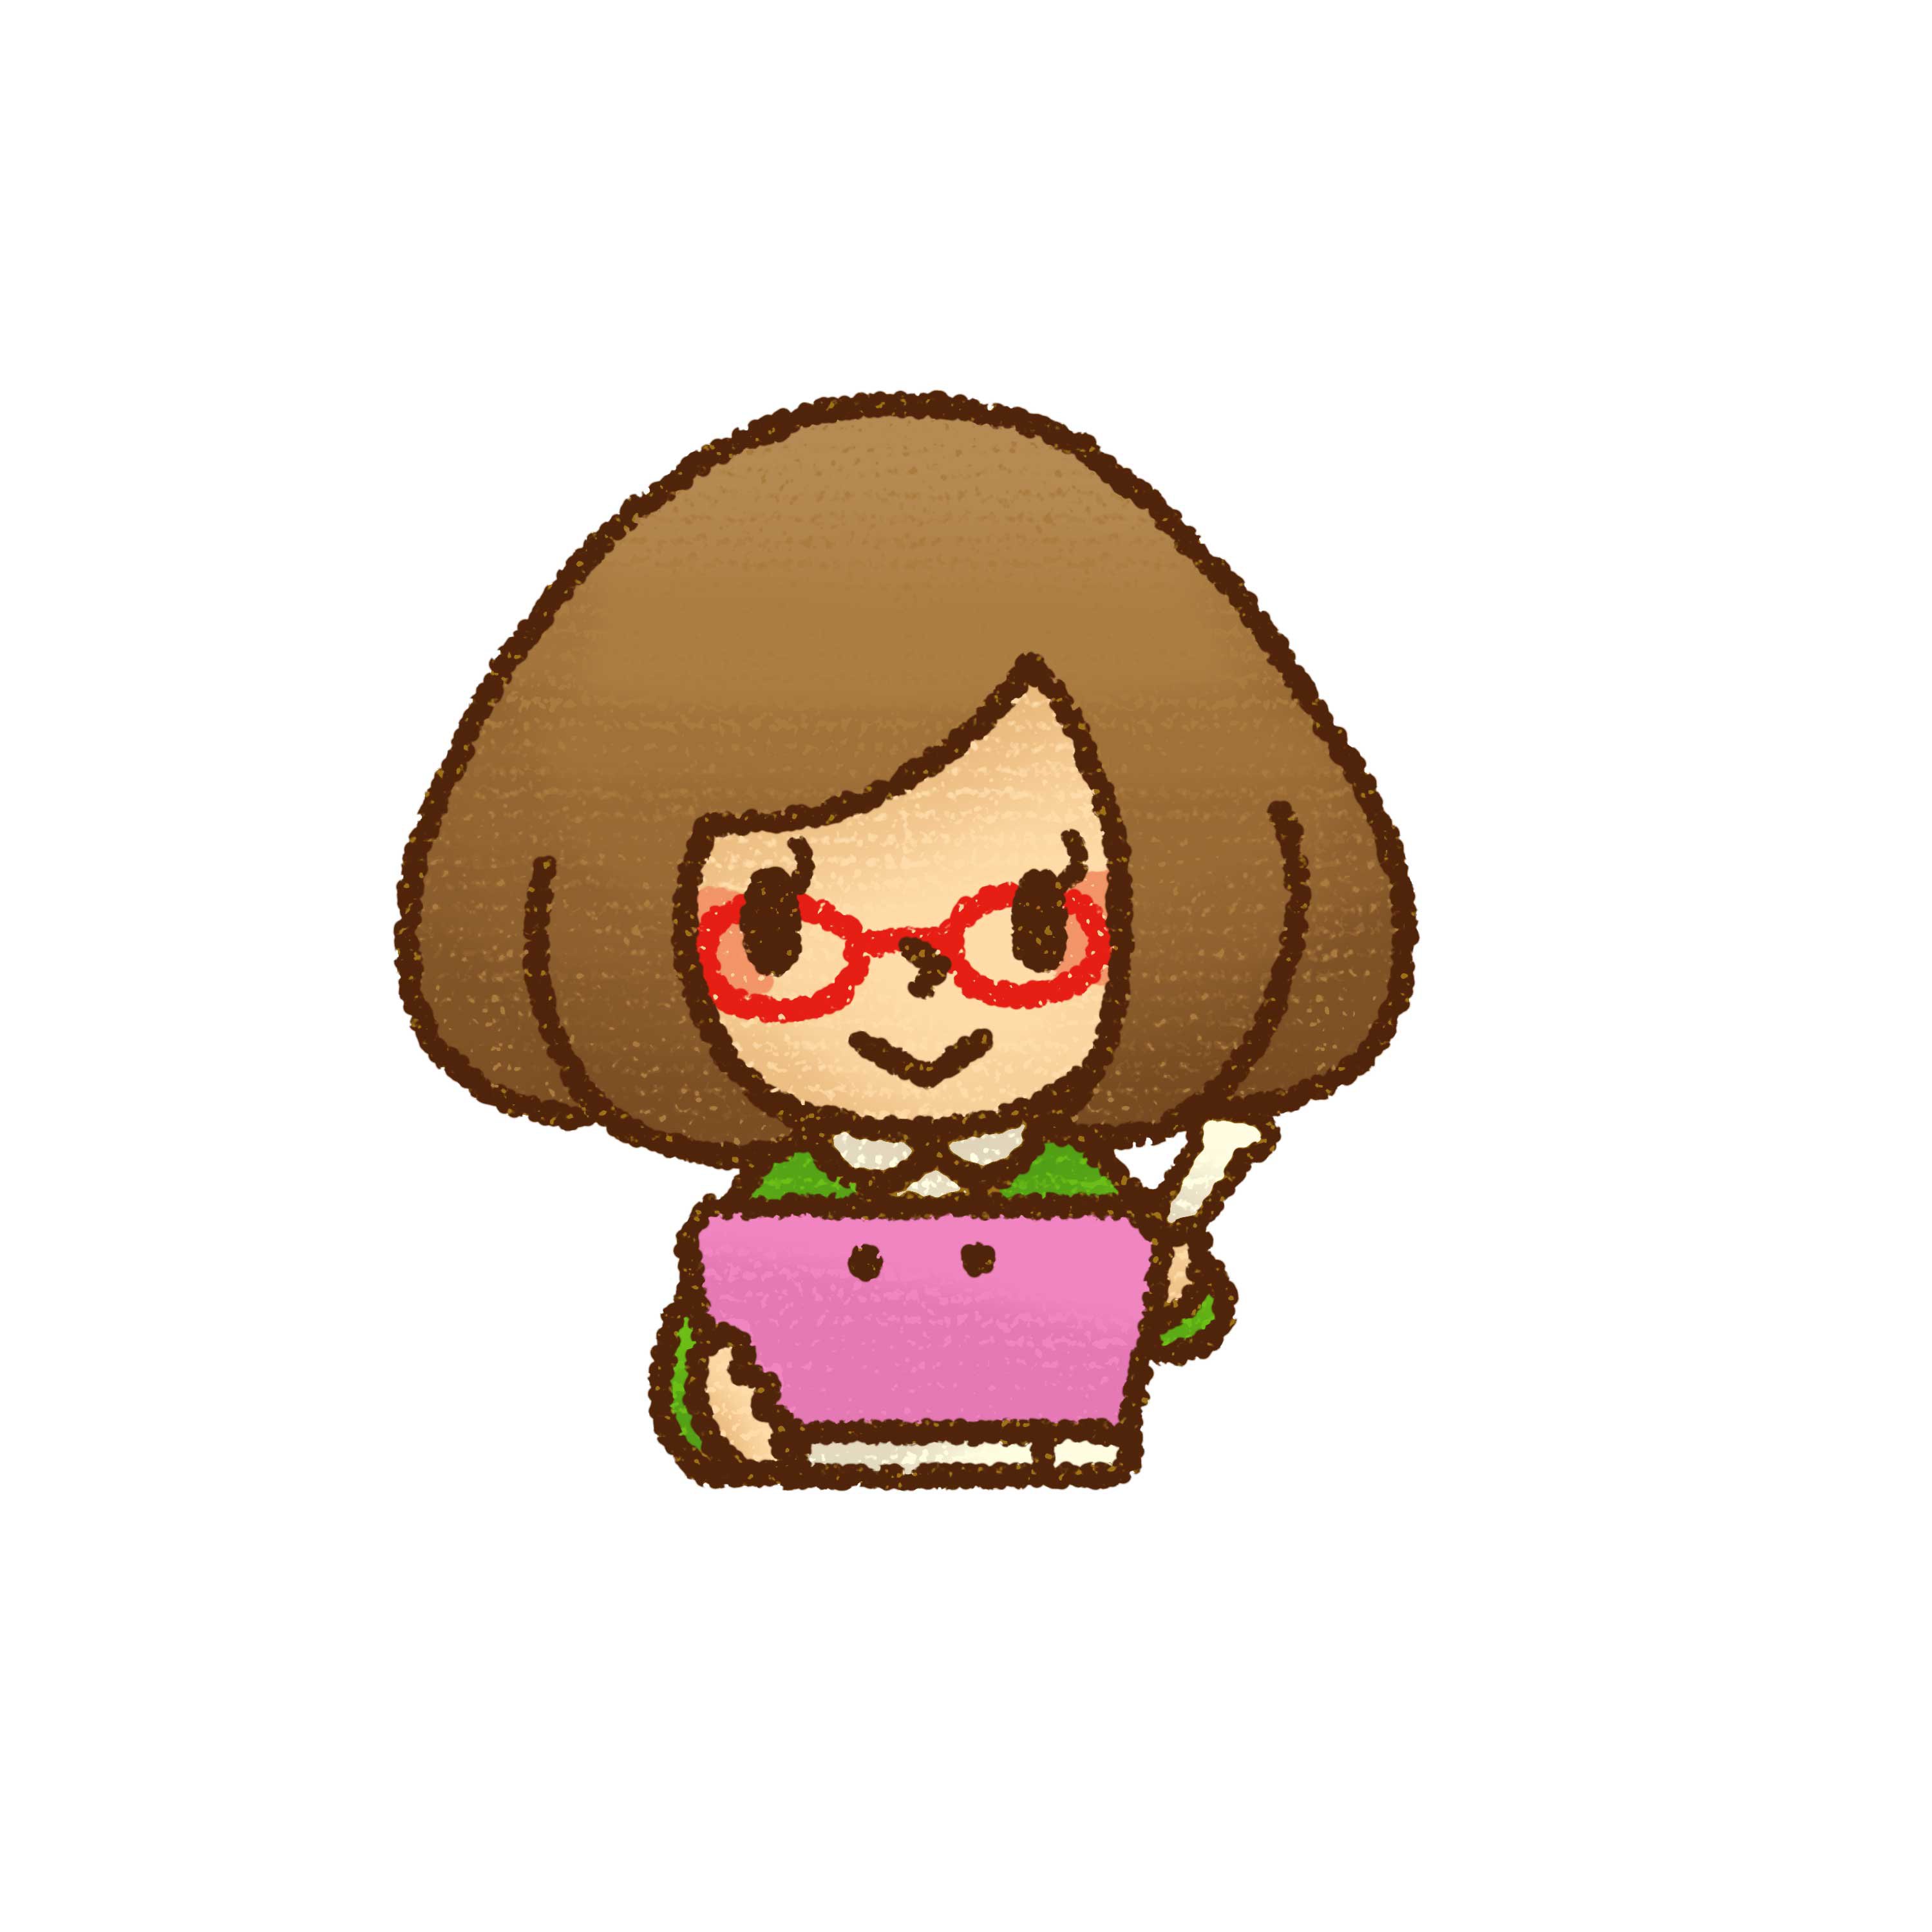 Swapdoodle Animal Crossing Basic Lessons 5